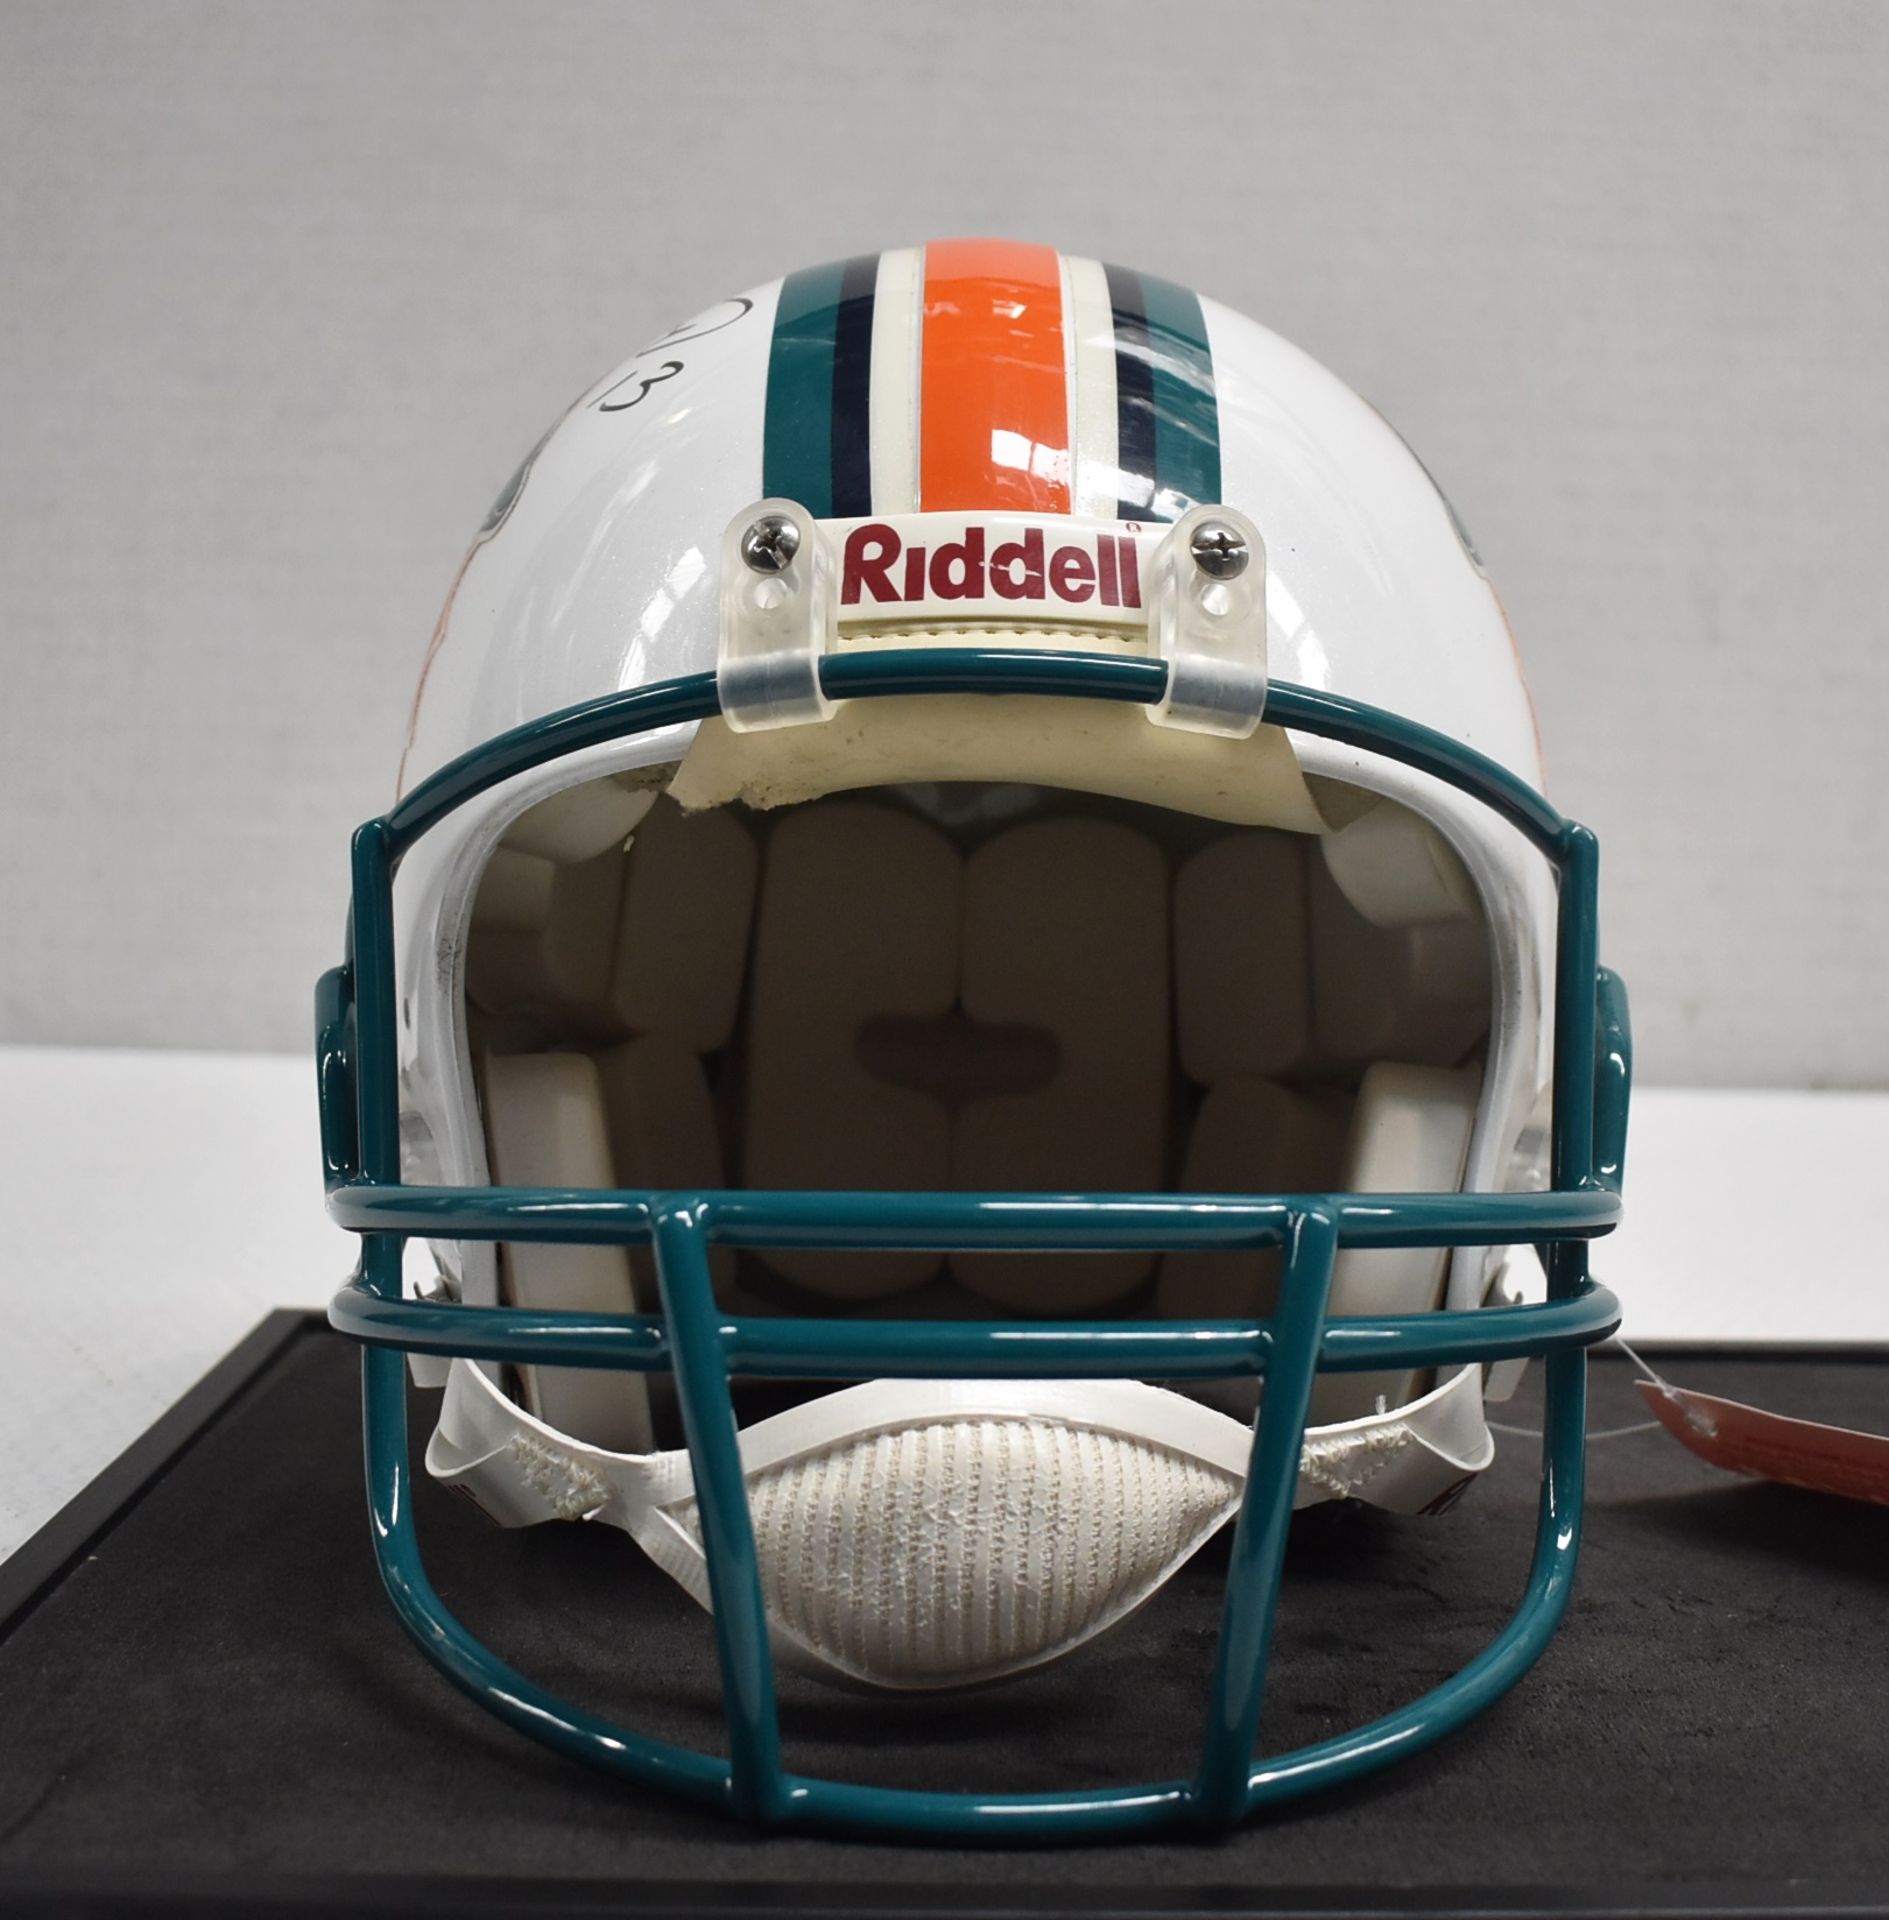 1 x Autographed Miami Dolphin's American Football Helmet, Signed By Quarterback DAN MARINO - Image 4 of 14